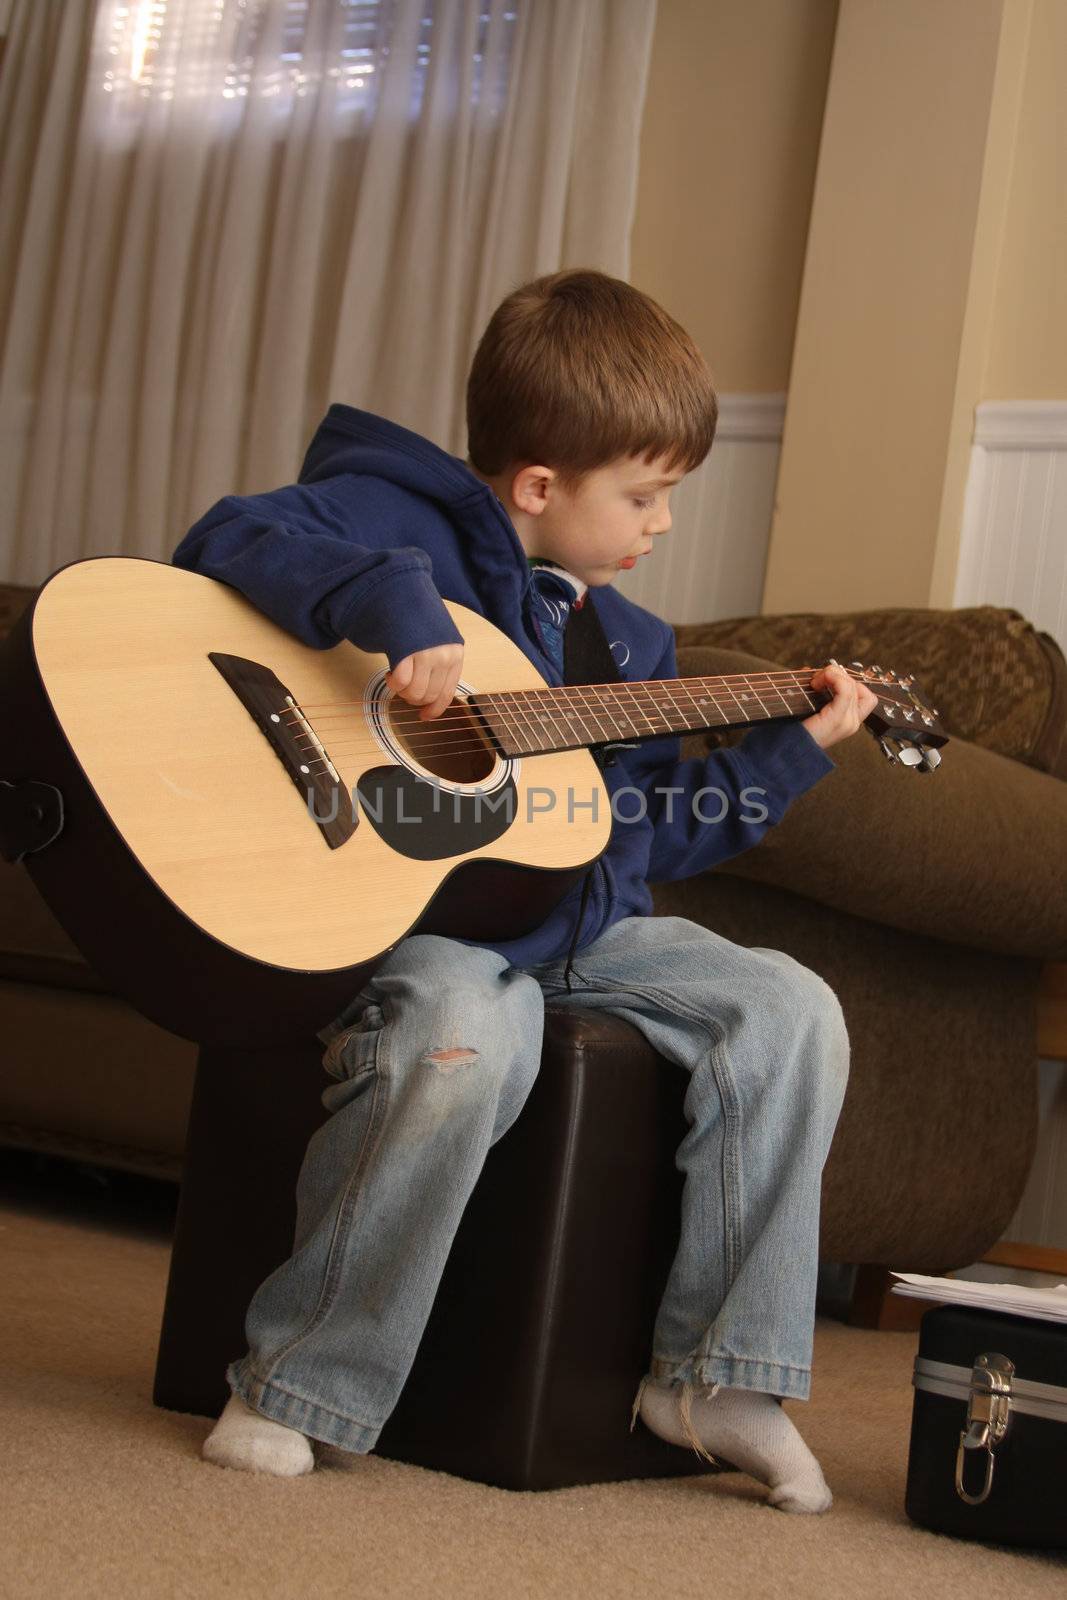 Young Boy playing the guitar during lessons.